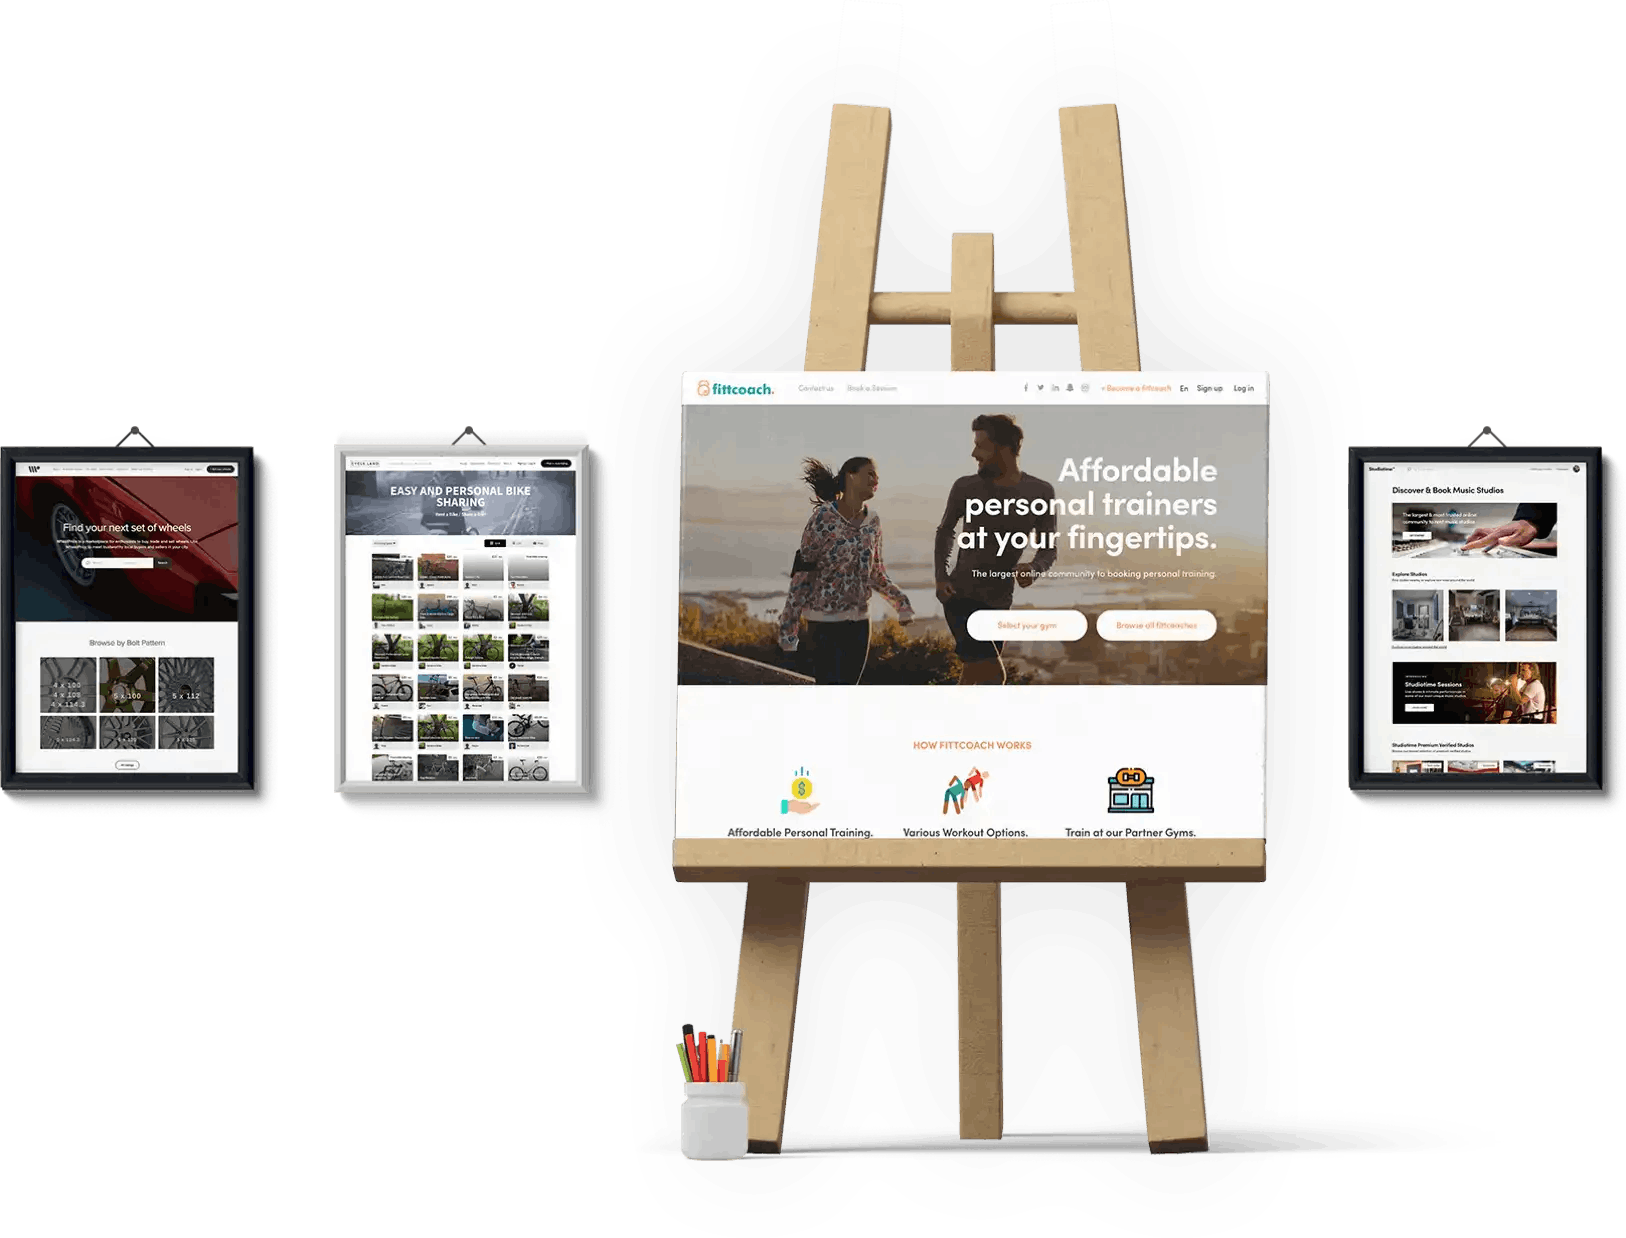 Examples of four Sharetribe-powered marketplaces. On the left, there are two Sharetribe Go marketplaces framed like photos, and on the right, one Sharetribe Flex marketplace framed the same way. In the middle of these, there's a Sharetribe Flex landing page in an easel. 